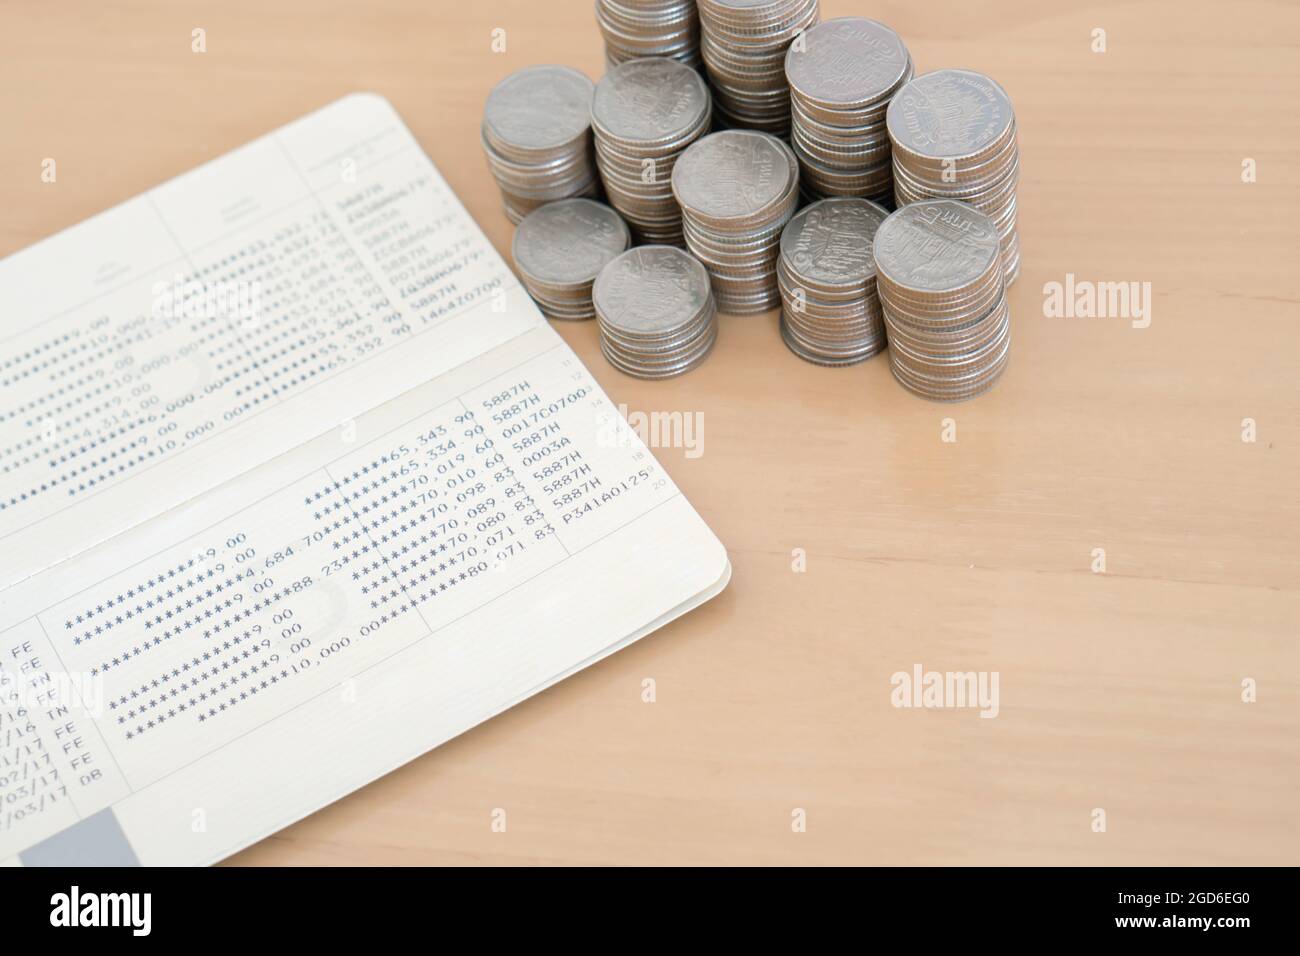 Close up of unstable stack of silver coins on bank passbook. Stock Photo